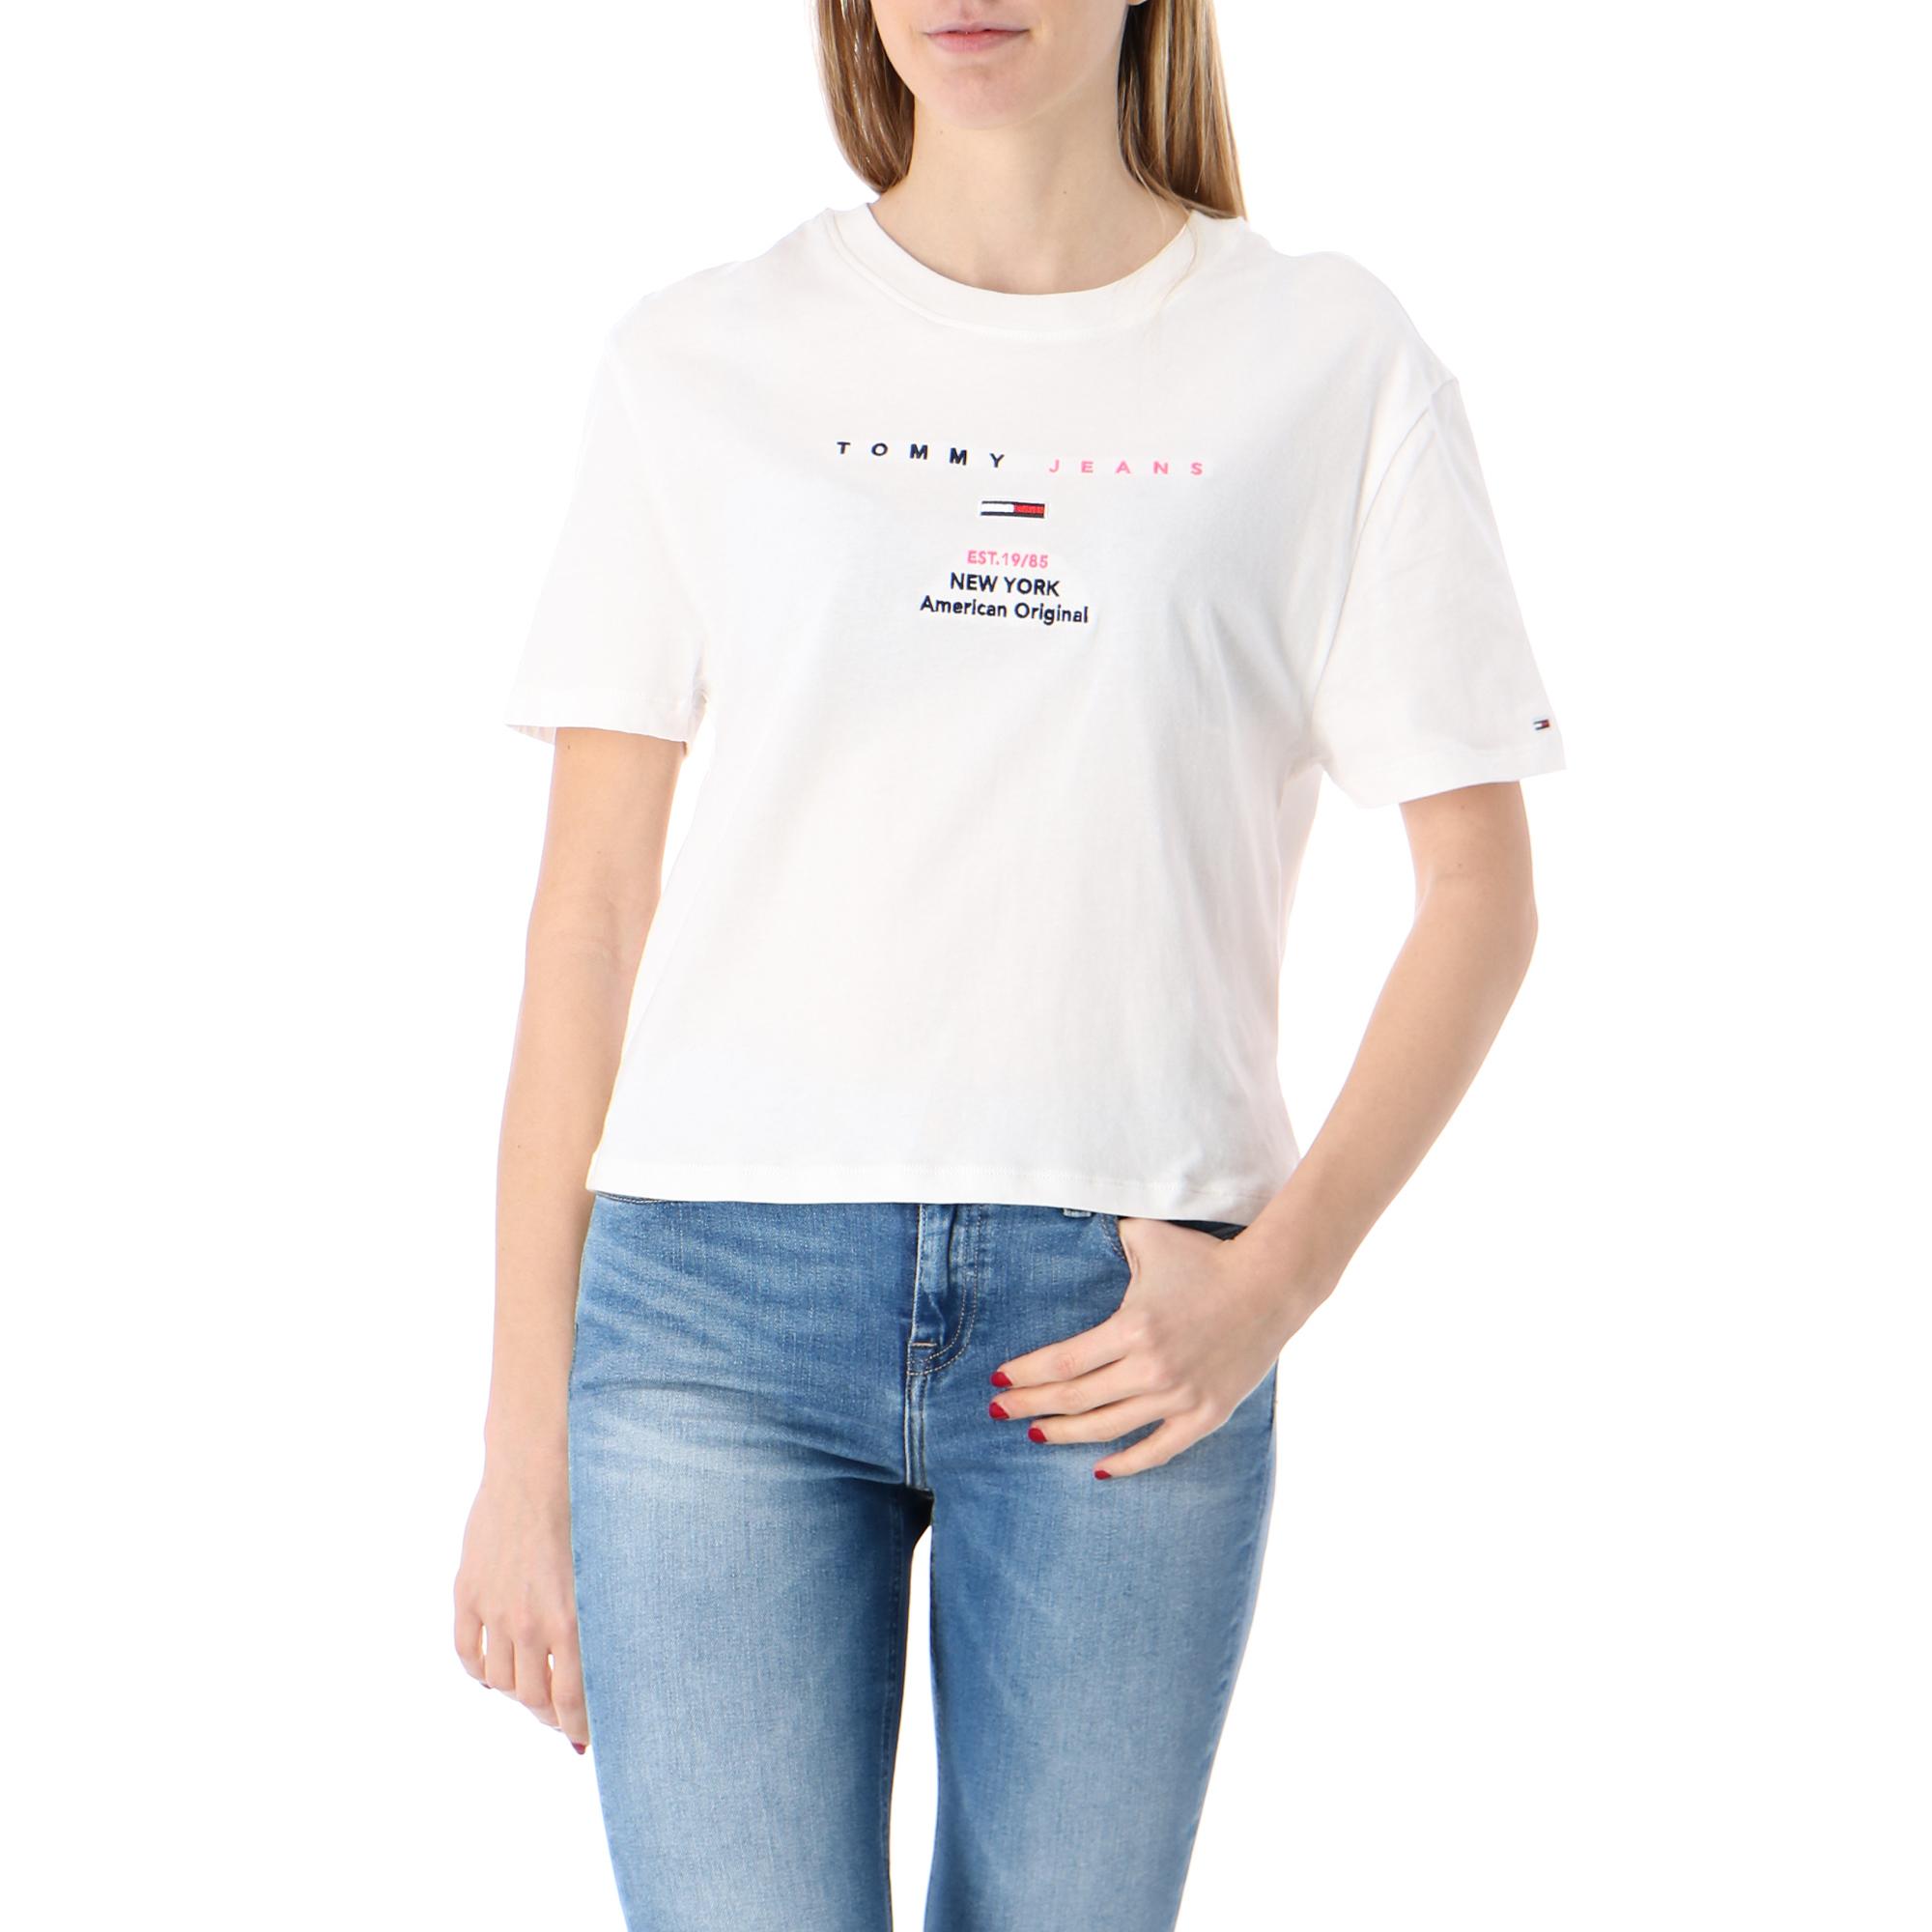 tommy jeans small logo